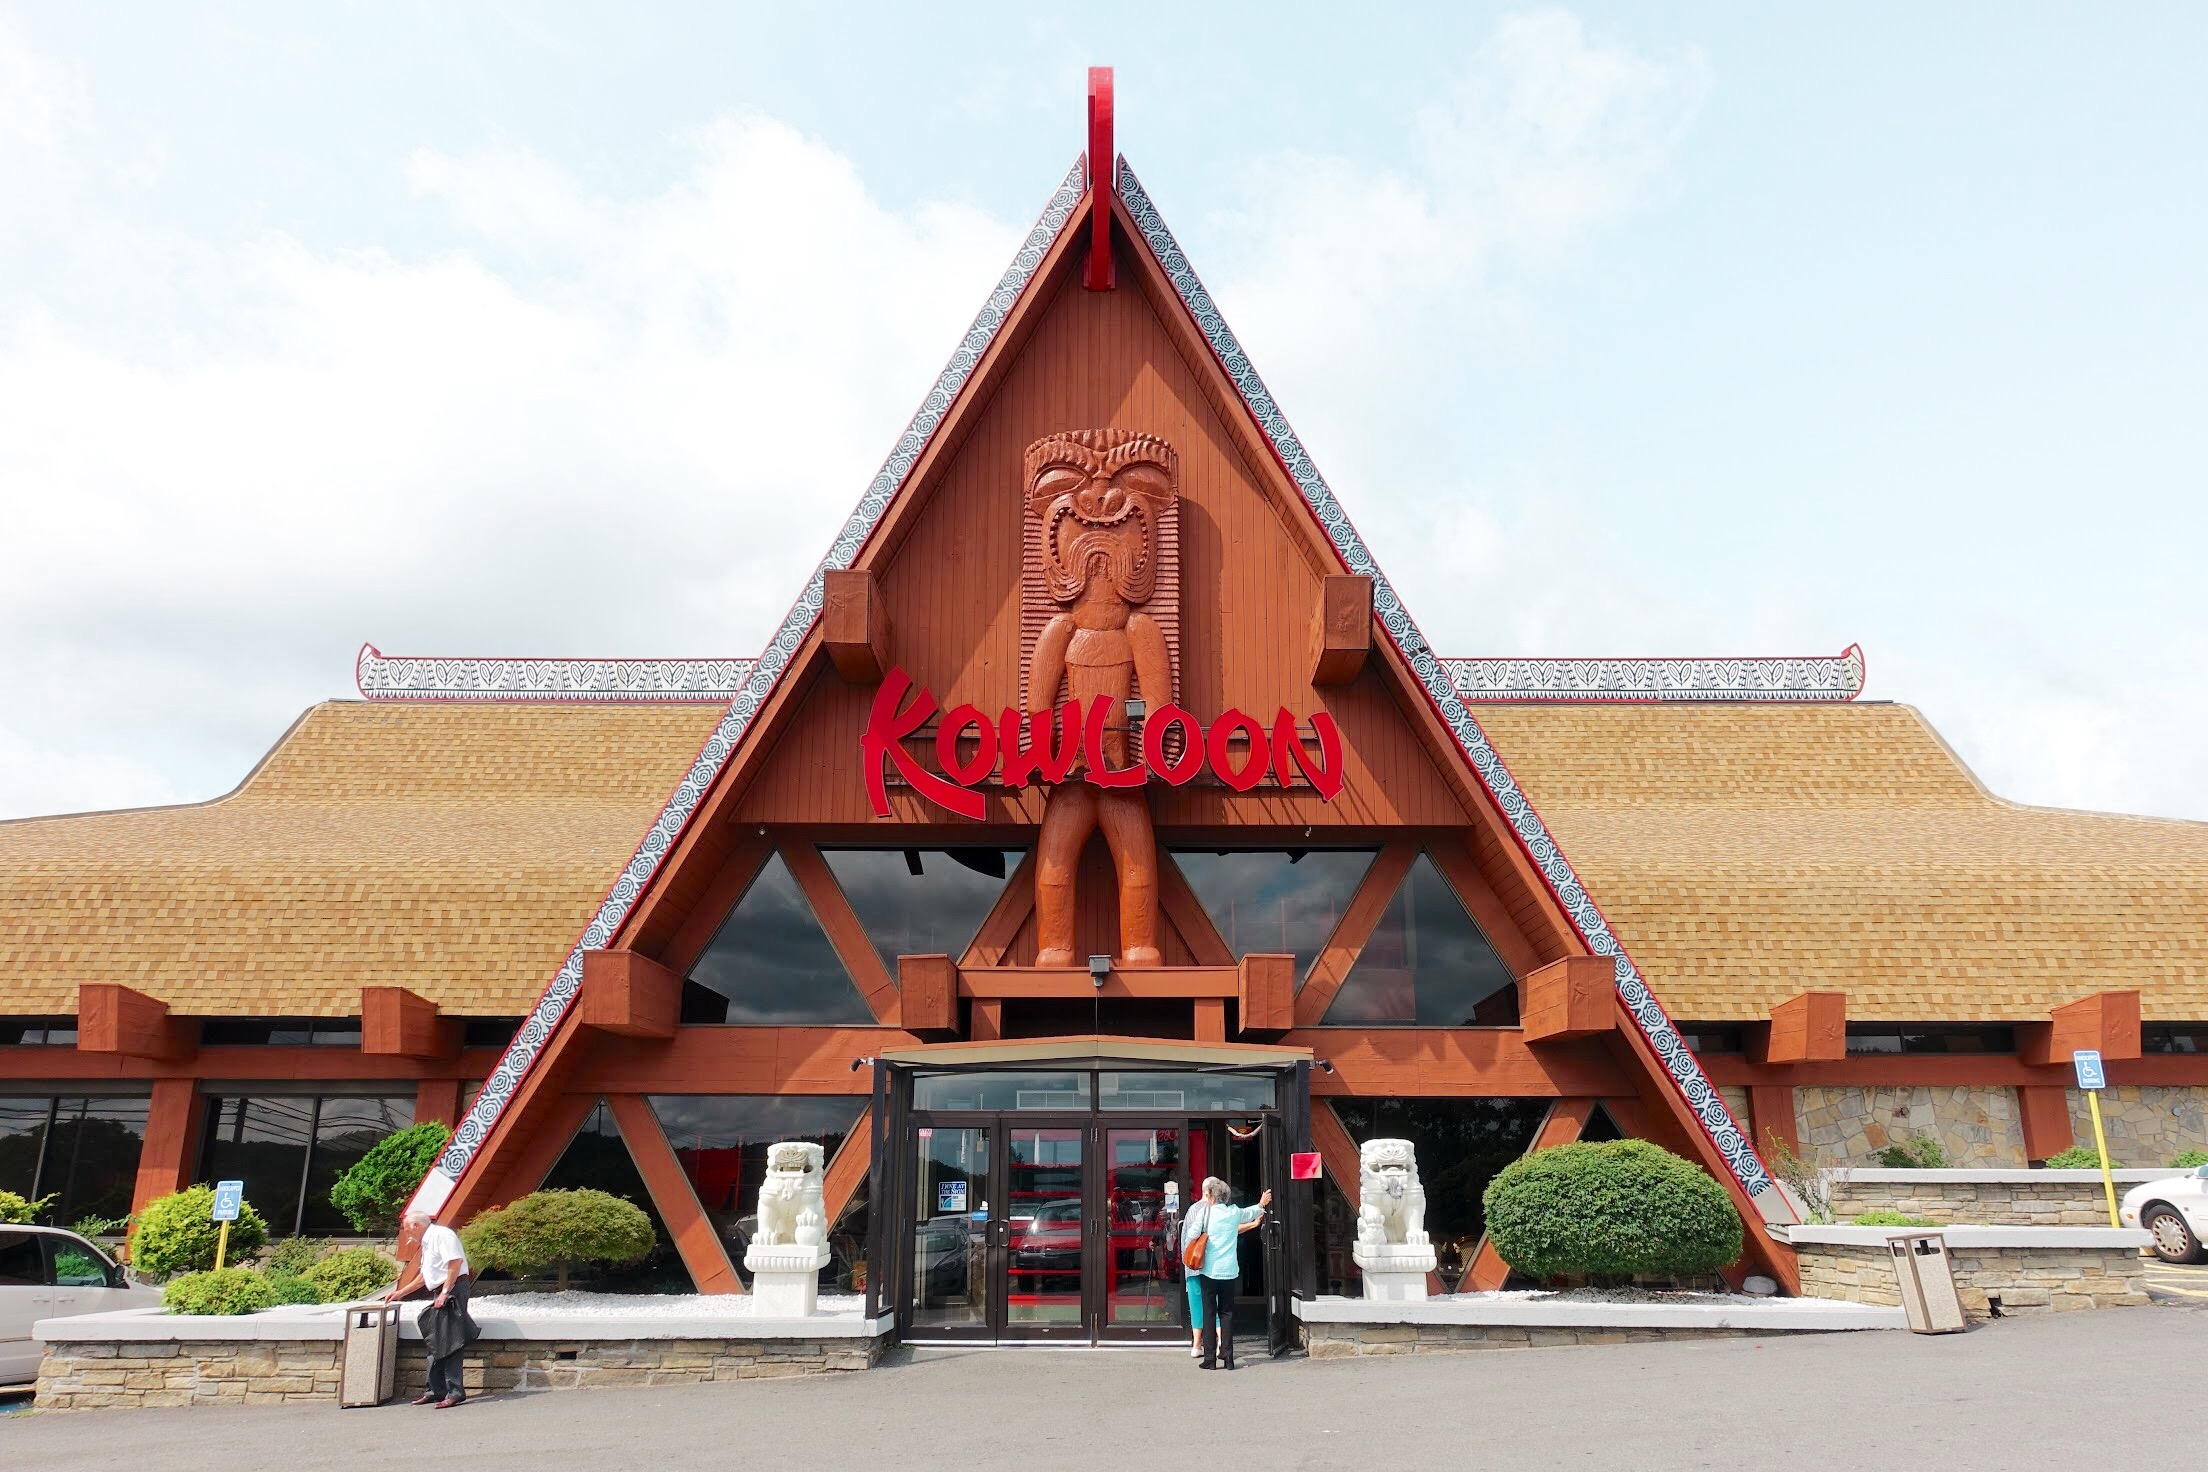 Exterior view of a restaurant with a large A-frame entrance and red signage